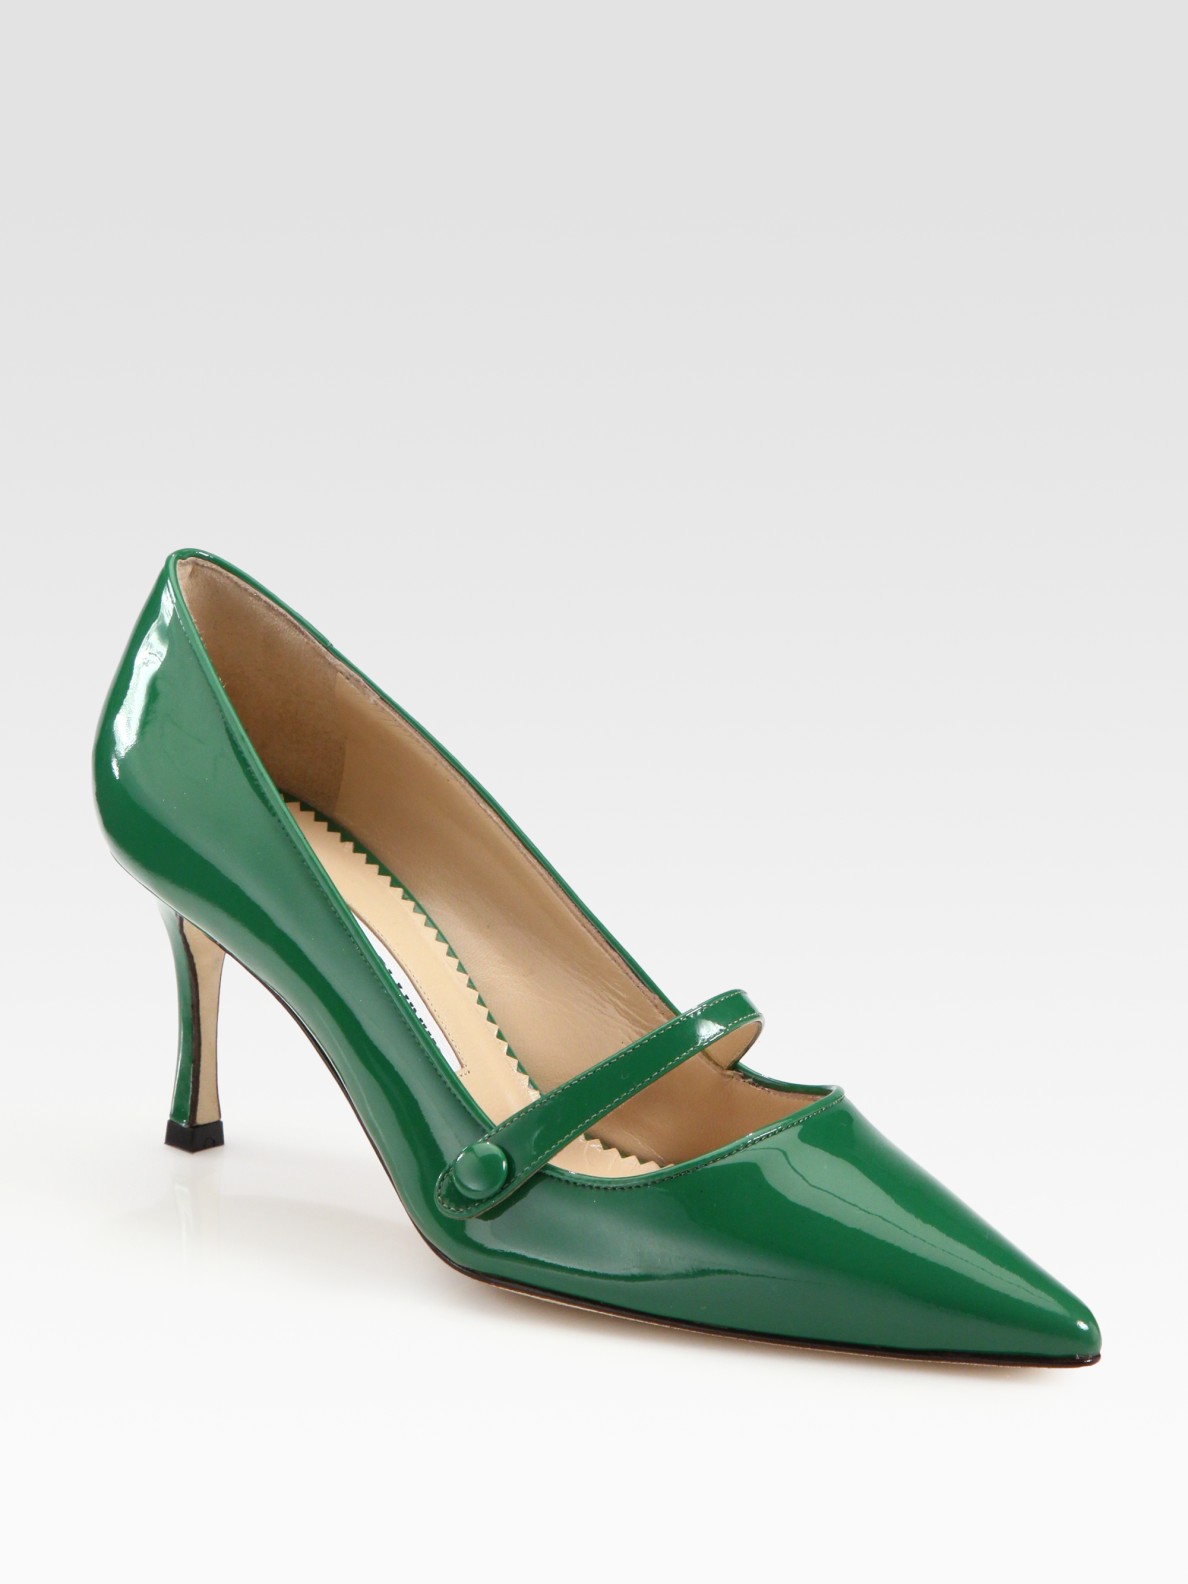 Manolo Blahnik Patent Leather Point Toe Mary Jane Pumps in Green - Lyst